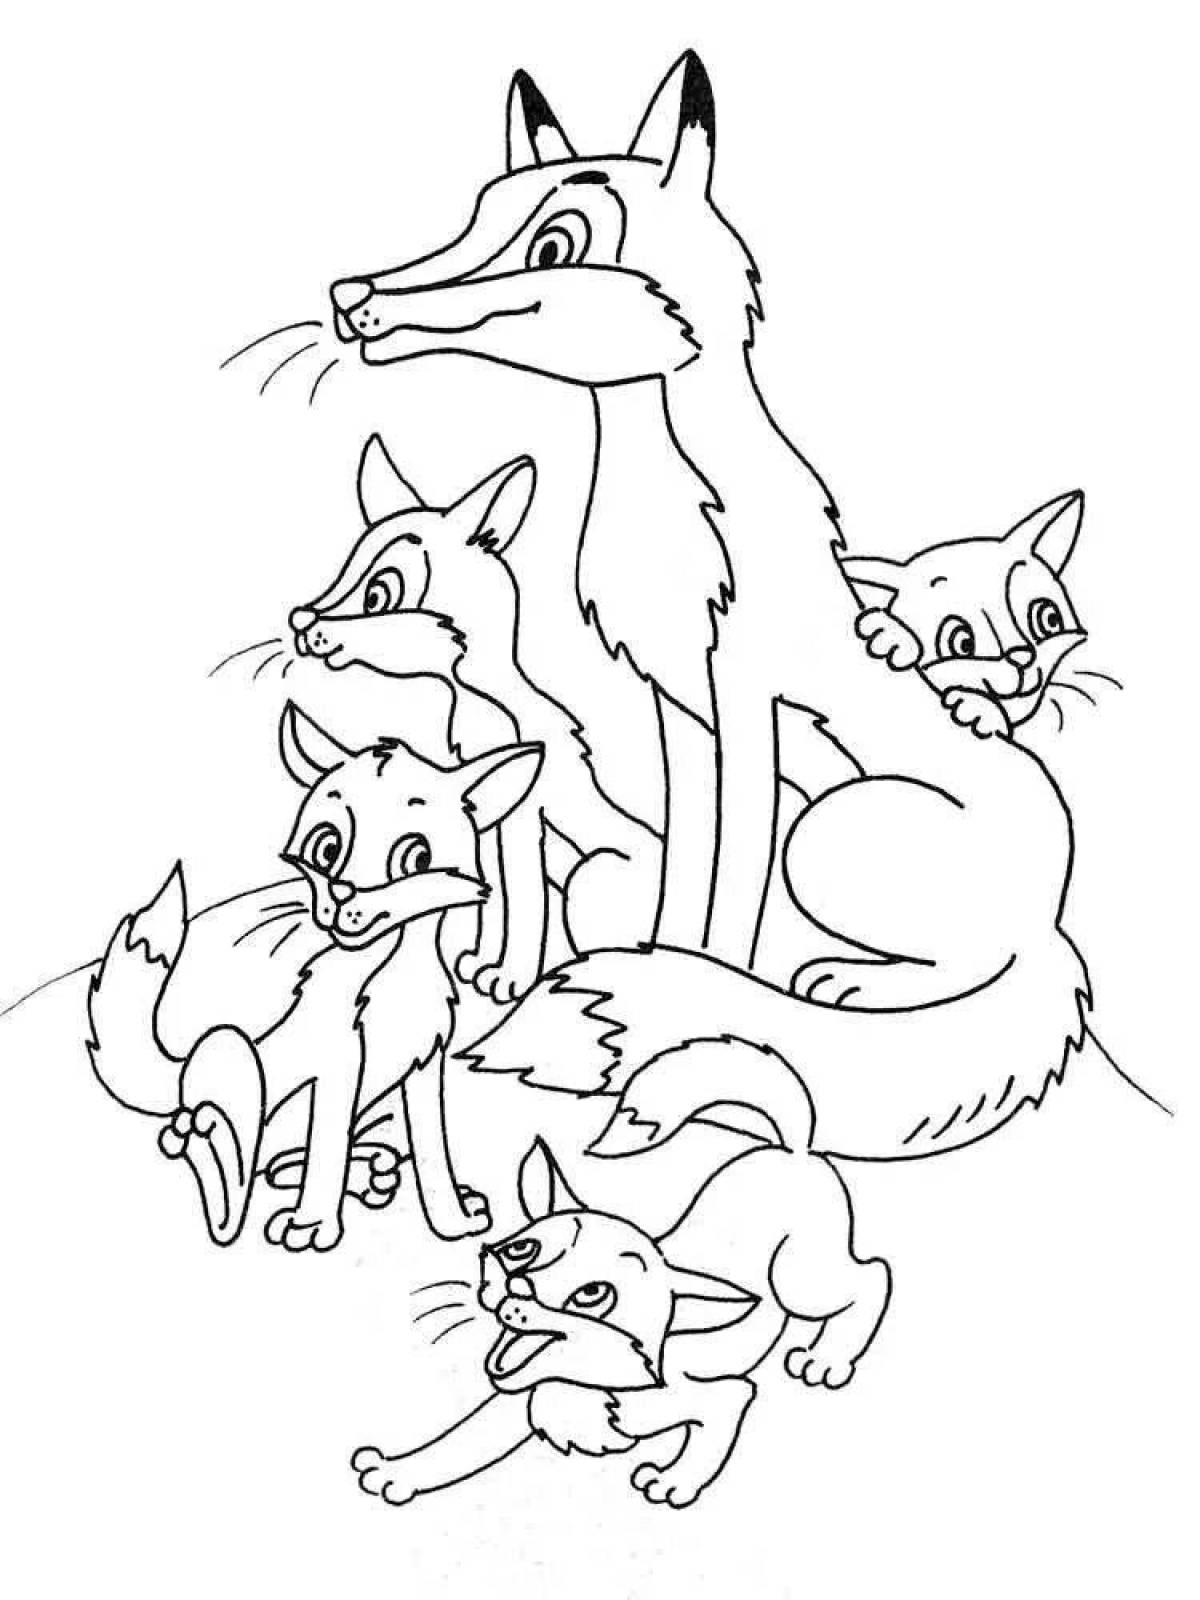 Vibrant wild animal and baby coloring page